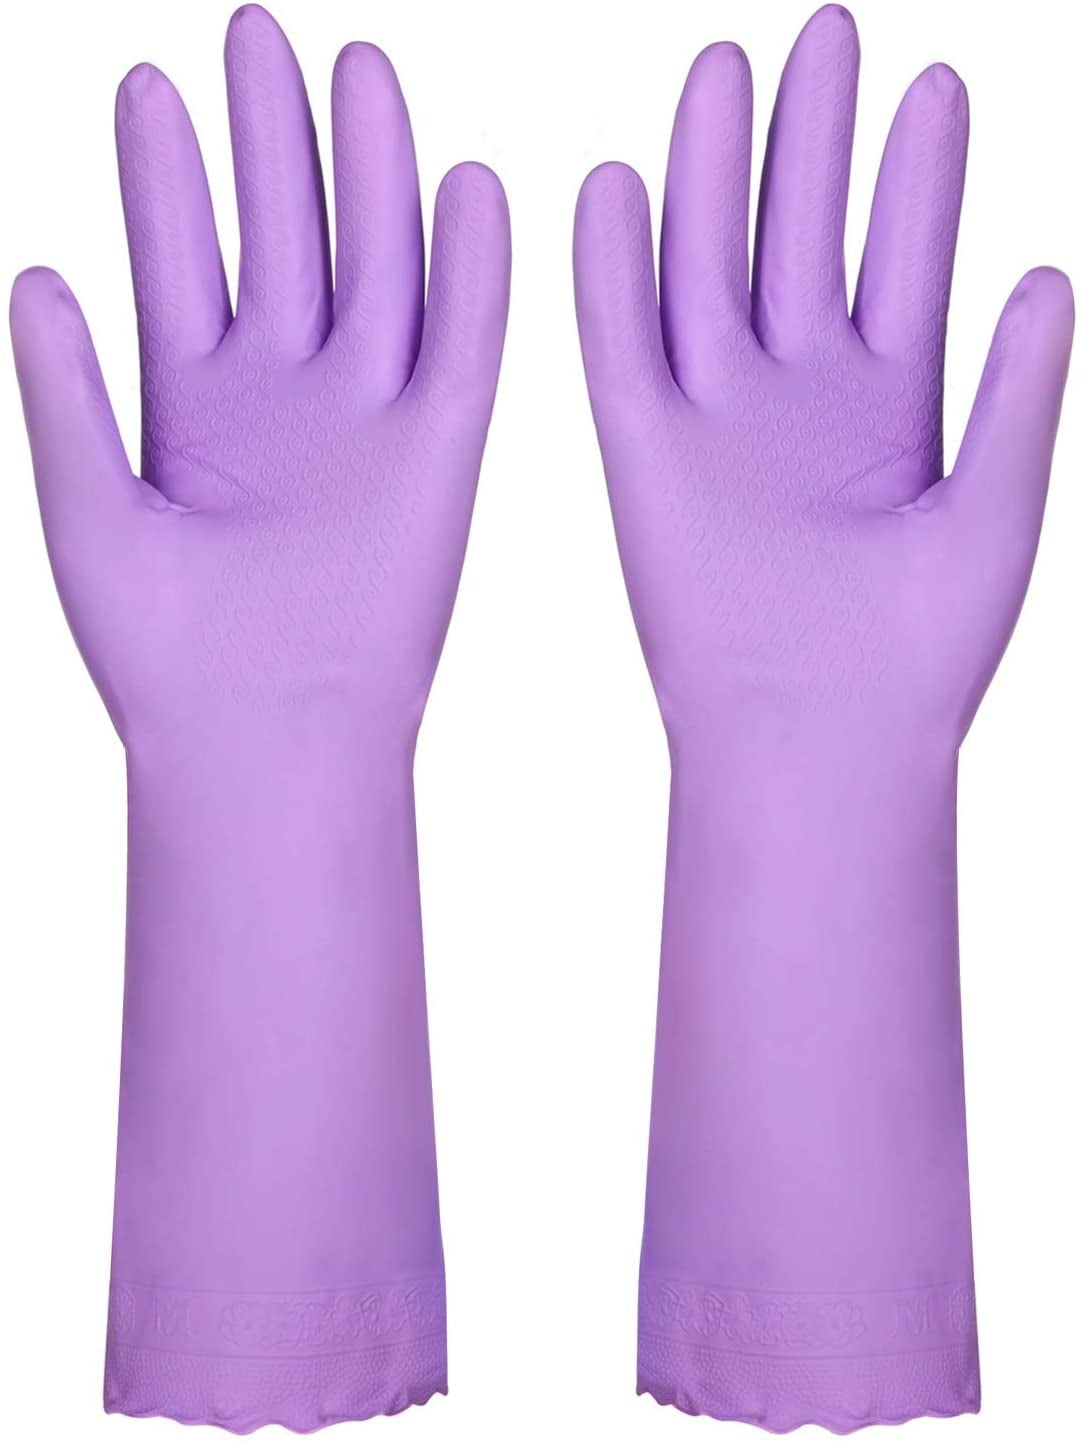 Latex Free Household Dishwashing Cleaning Gloves With Cotton Lining Kitchen Gloves 2 Pairs Purple Medium 460f6a6a 349c 4a03 9caf A1f36b17dd9f.9b9c80c3e8557d7d214ef38455c446c7 